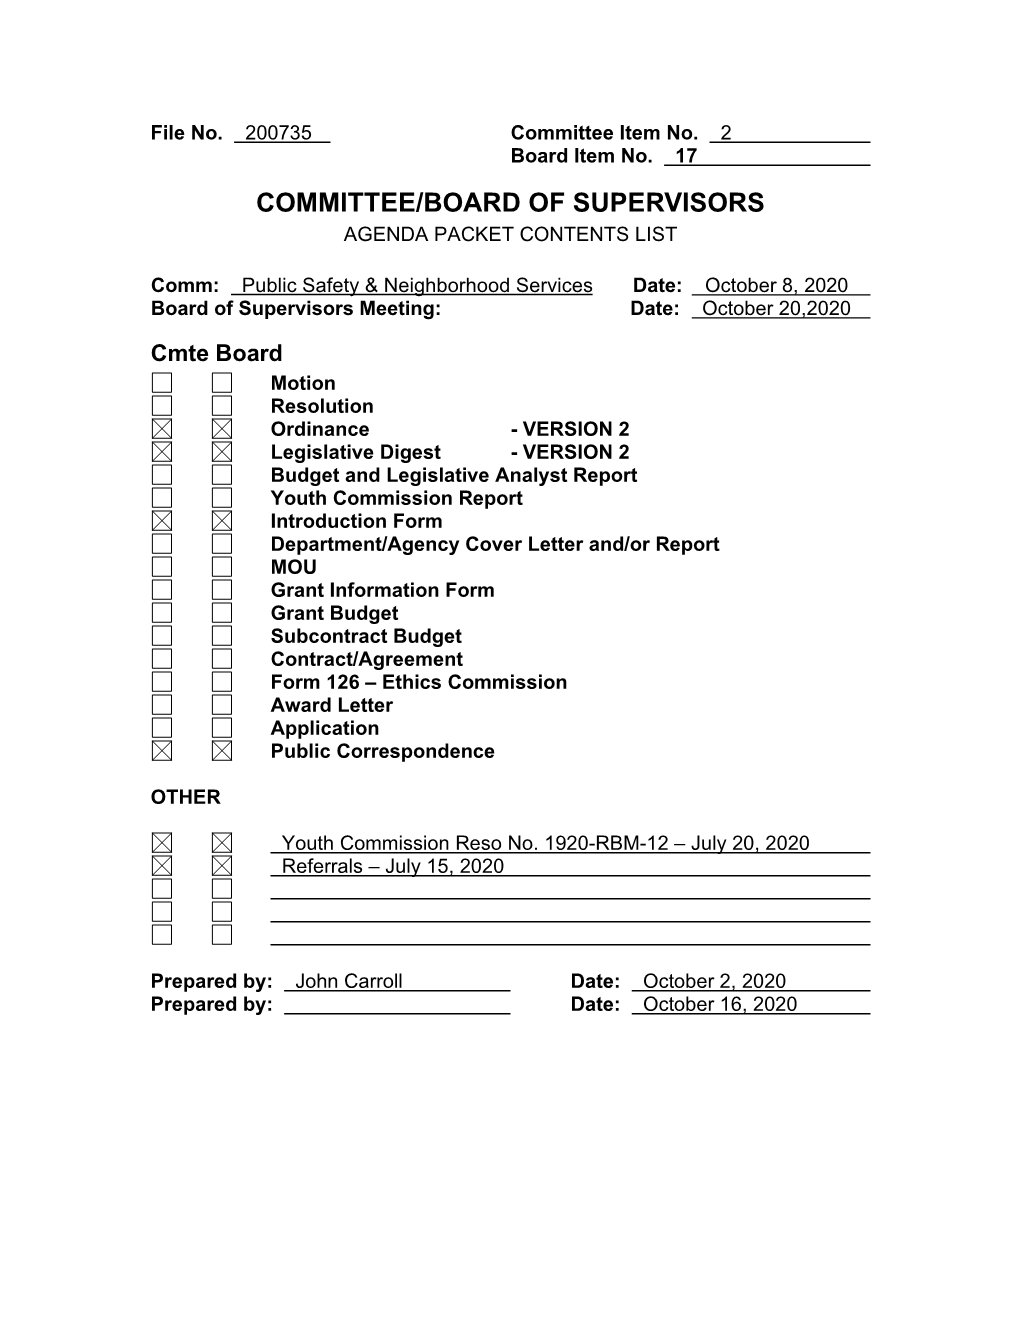 Committee/Board of Supervisors Agenda Packet Contents List